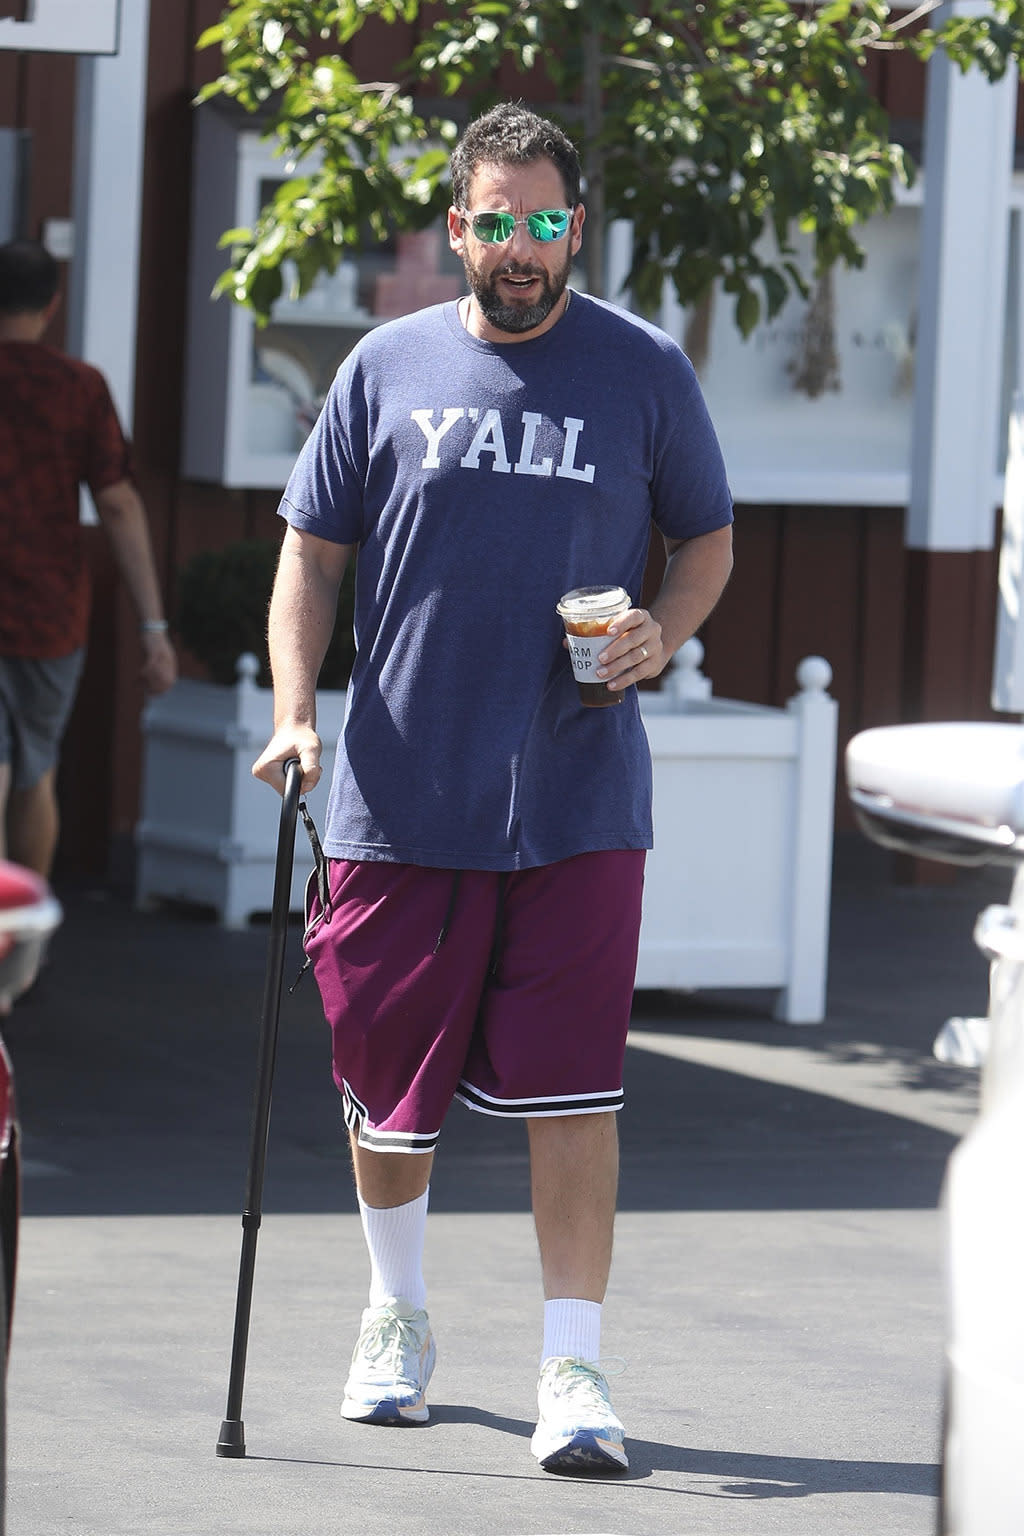 Brentwood, CA  - *EXCLUSIVE*  - Comedian Adam Sandler seen stepping out with his wife Jackie this morning to grab some breakfast and coffee.  Adam looked to be in good spirits despite using a walking cane today.

Pictured: Adam Sandler

BACKGRID USA 5 SEPTEMBER 2022 

USA: +1 310 798 9111 / usasales@backgrid.com

UK: +44 208 344 2007 / uksales@backgrid.com

*UK Clients - Pictures Containing Children
Please Pixelate Face Prior To Publication*